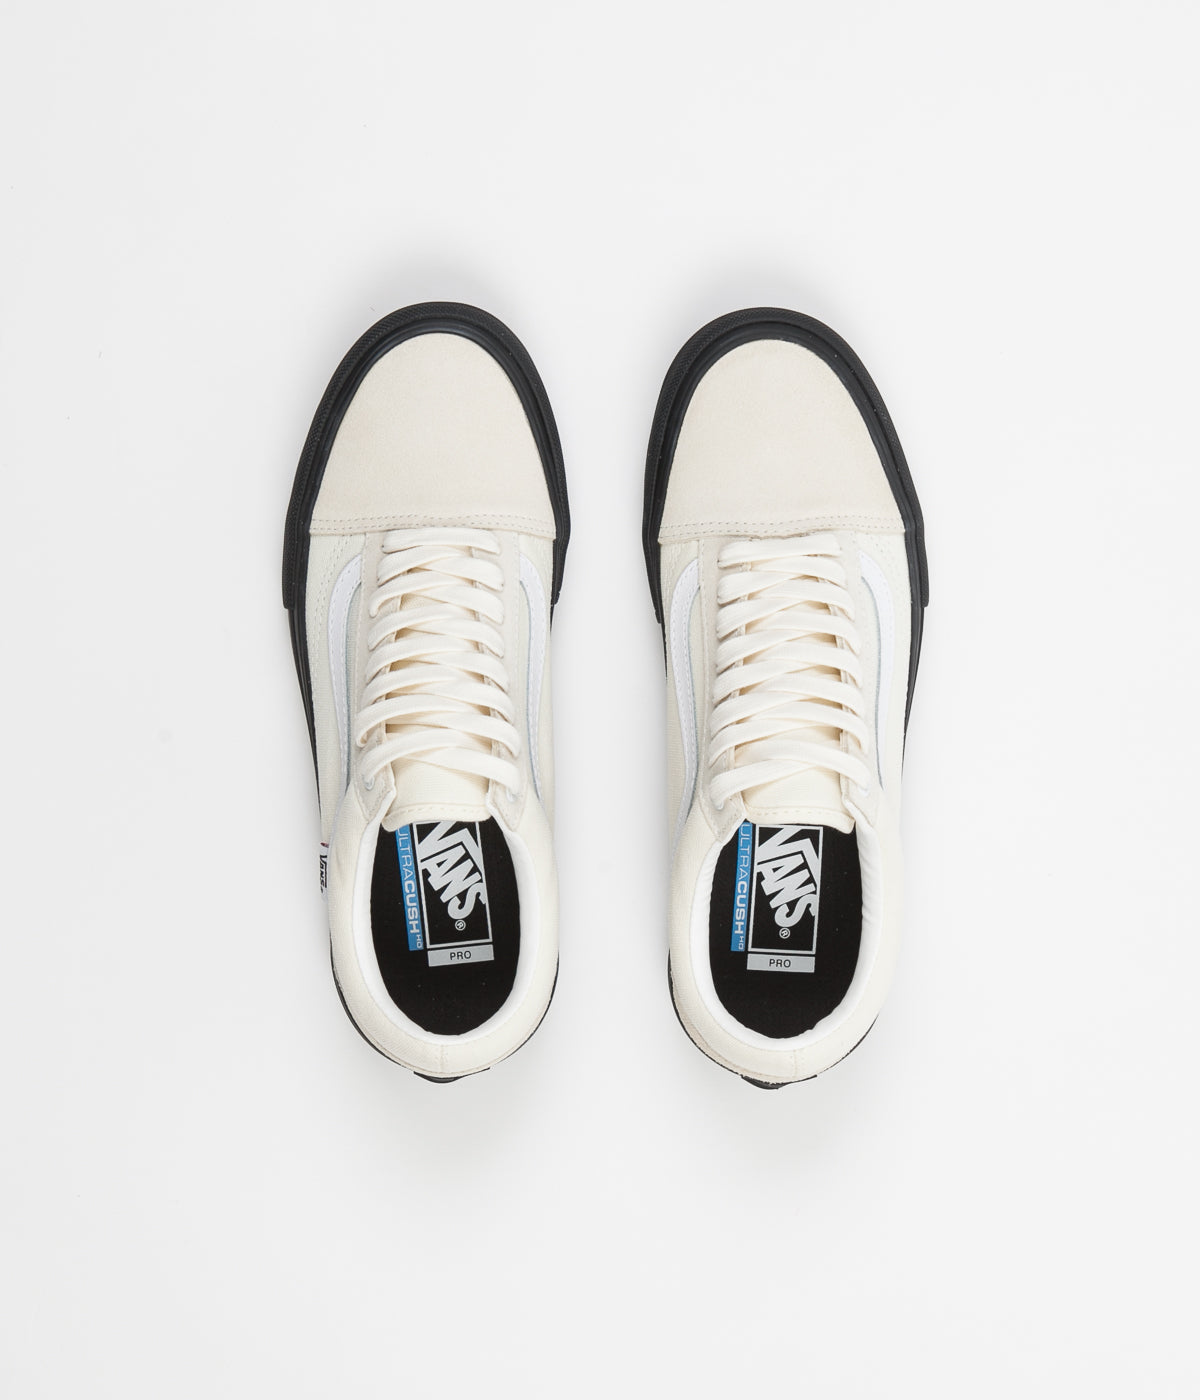 classic white and black vans